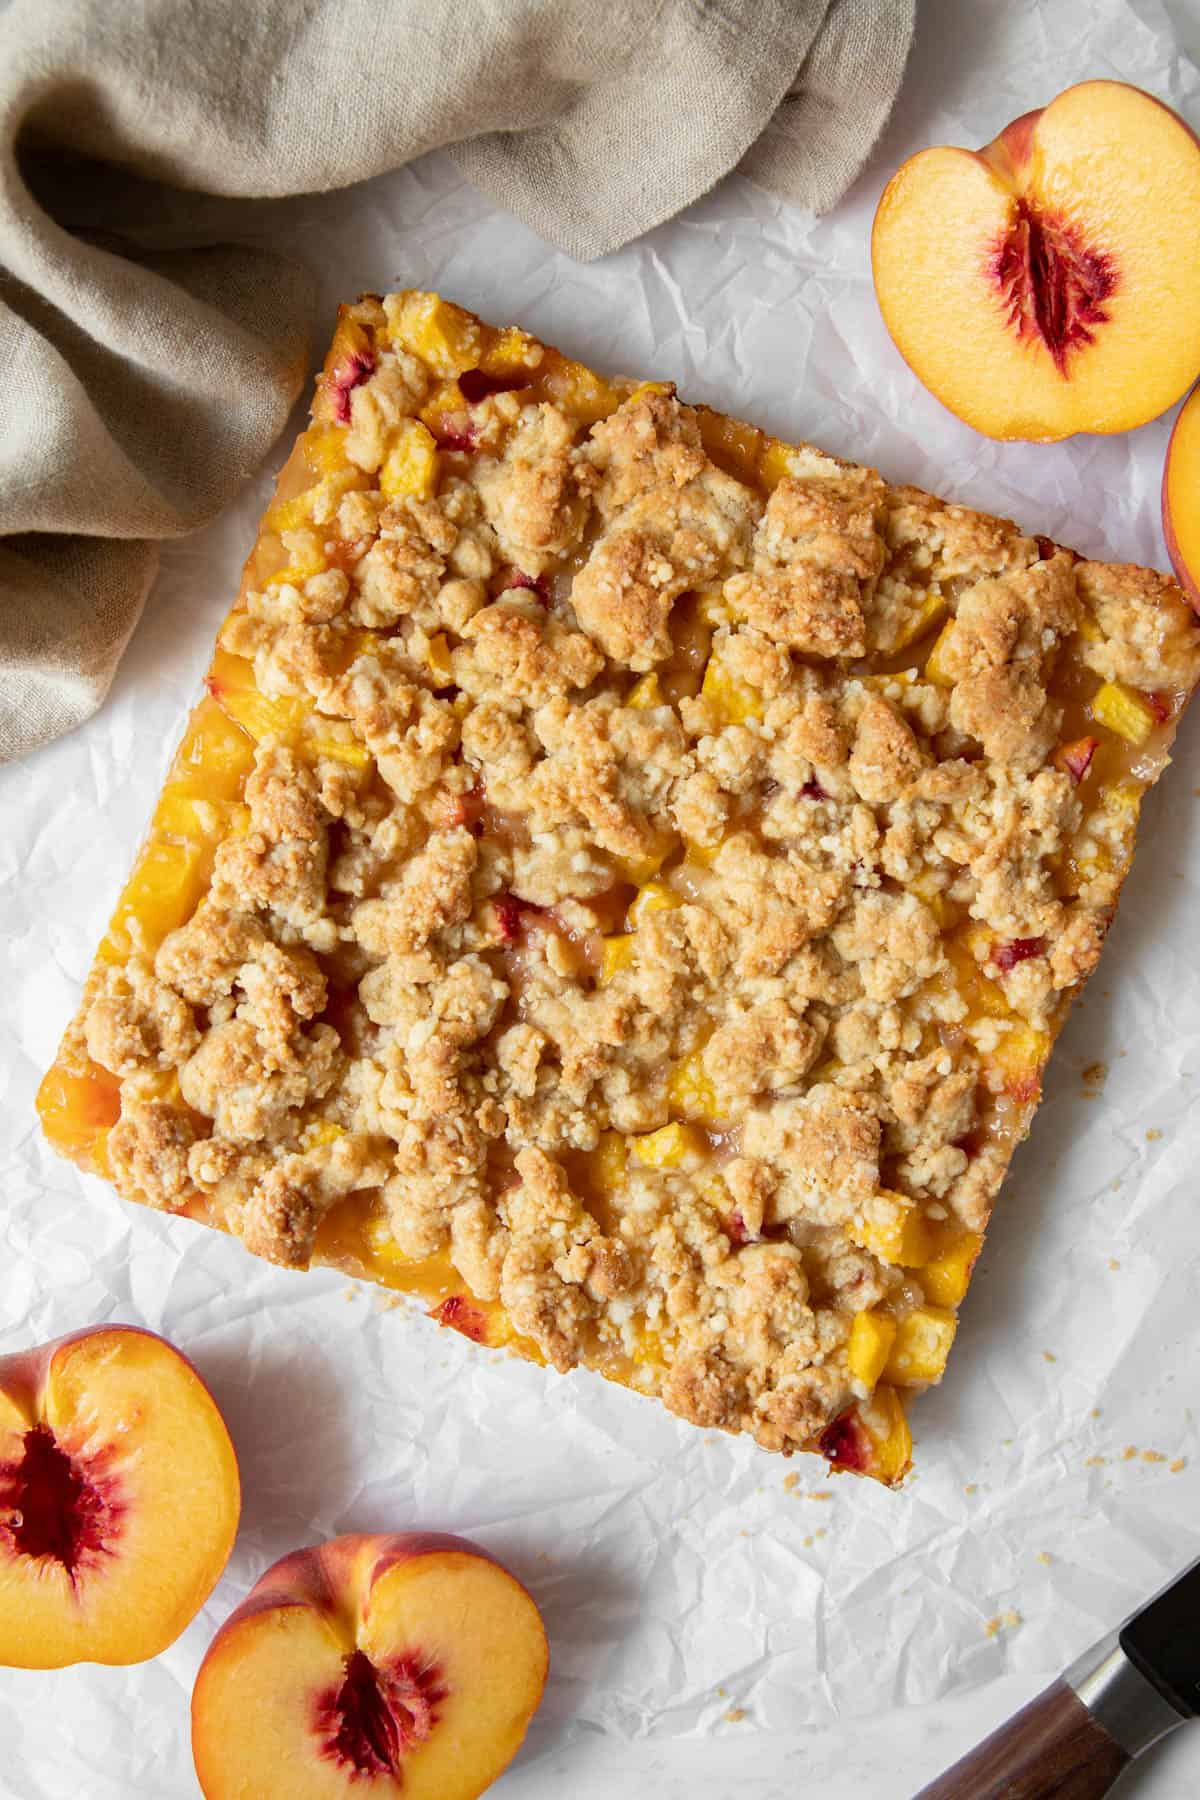 Peach bars after they have been baked sit on a piece of white parchment paper before cutting into squares with a knife.